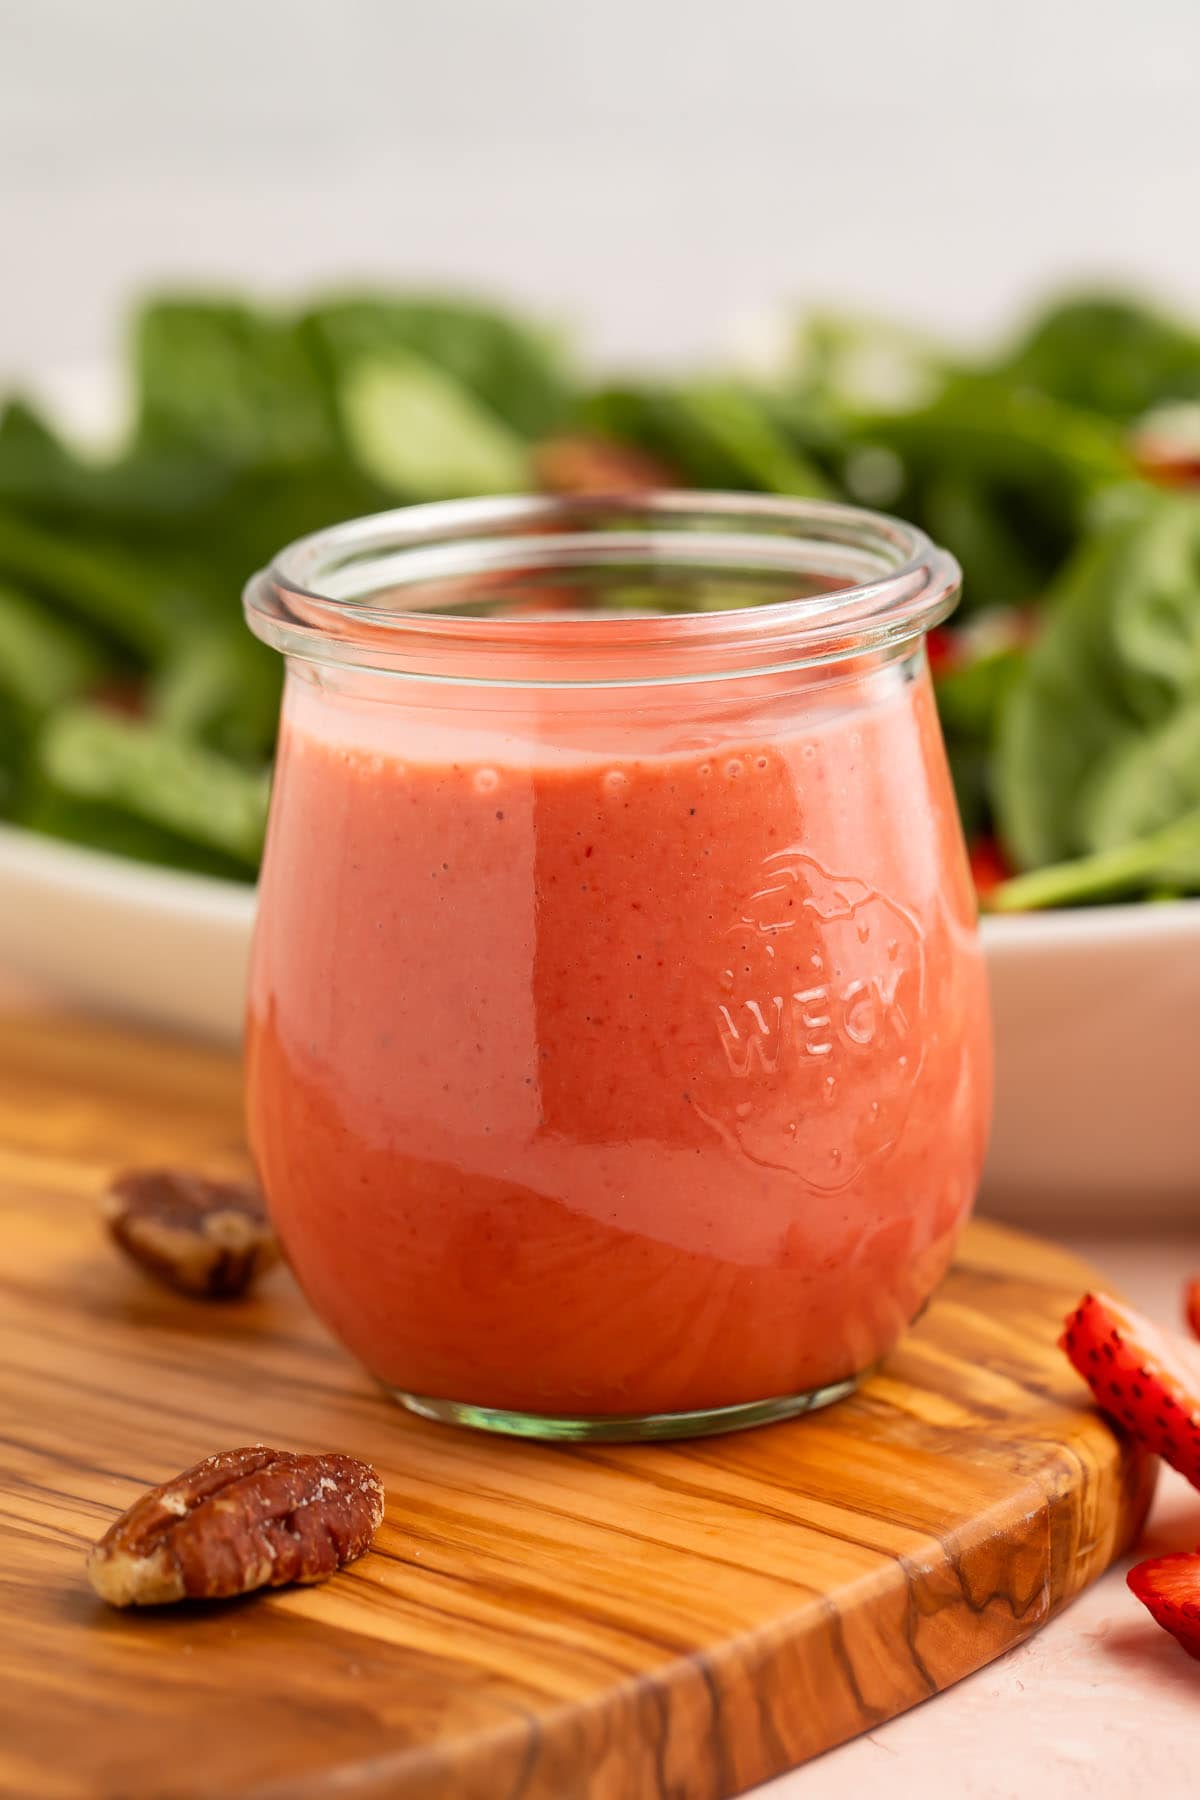 A jar of creamy pale red strawberry vinaigrette in front of a leafy spinach salad.